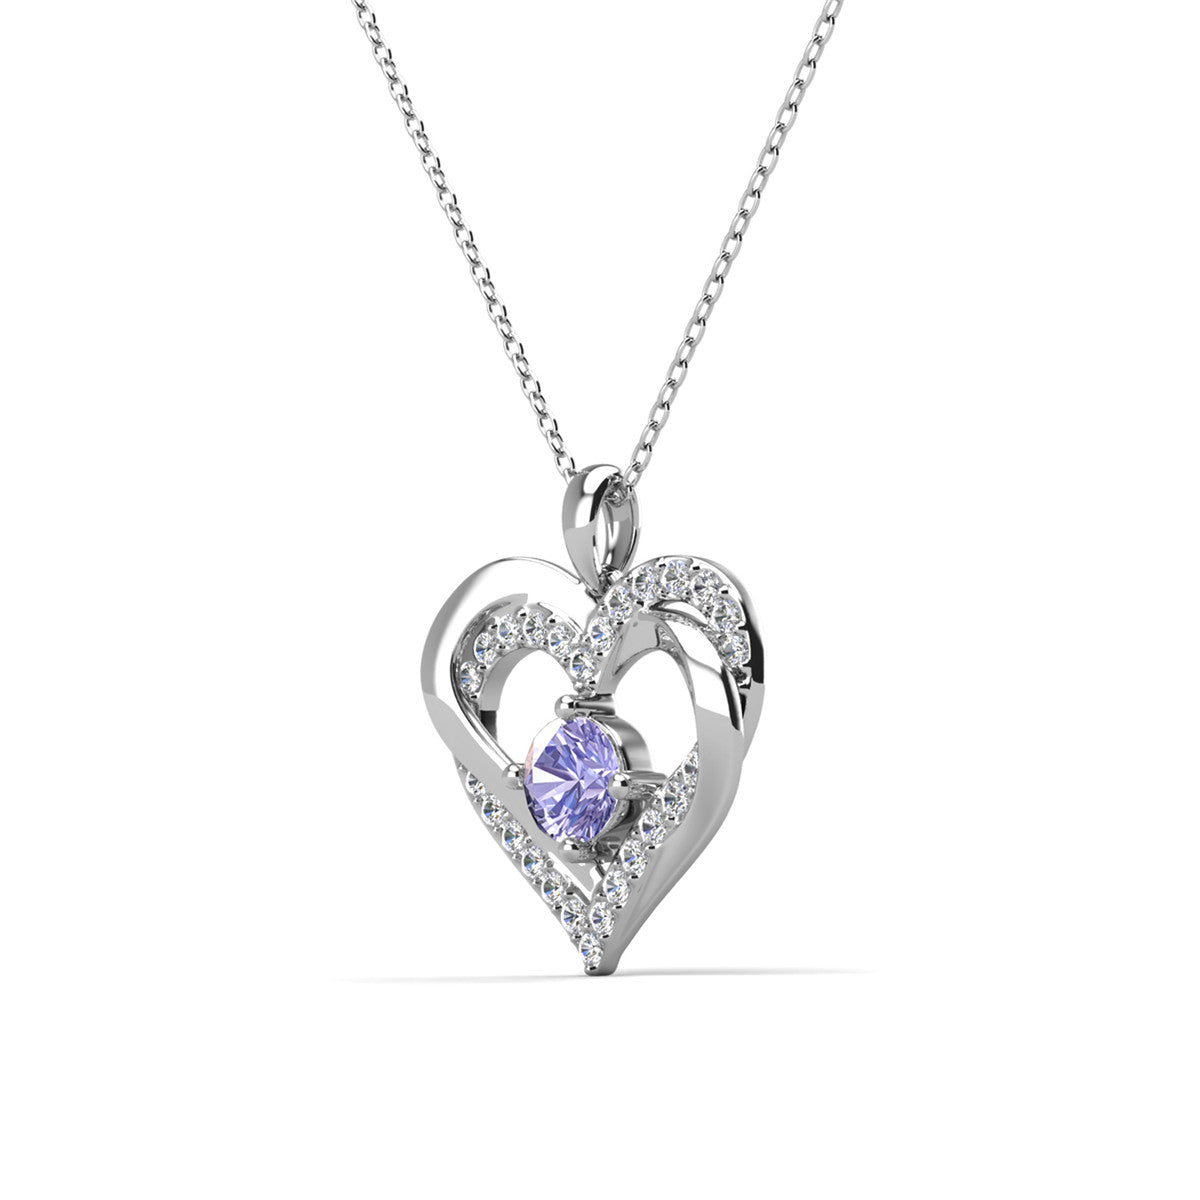 Forever June Birthstone Alexandrite Necklace, 18k White Gold Plated Silver Double Heart Crystal Necklace